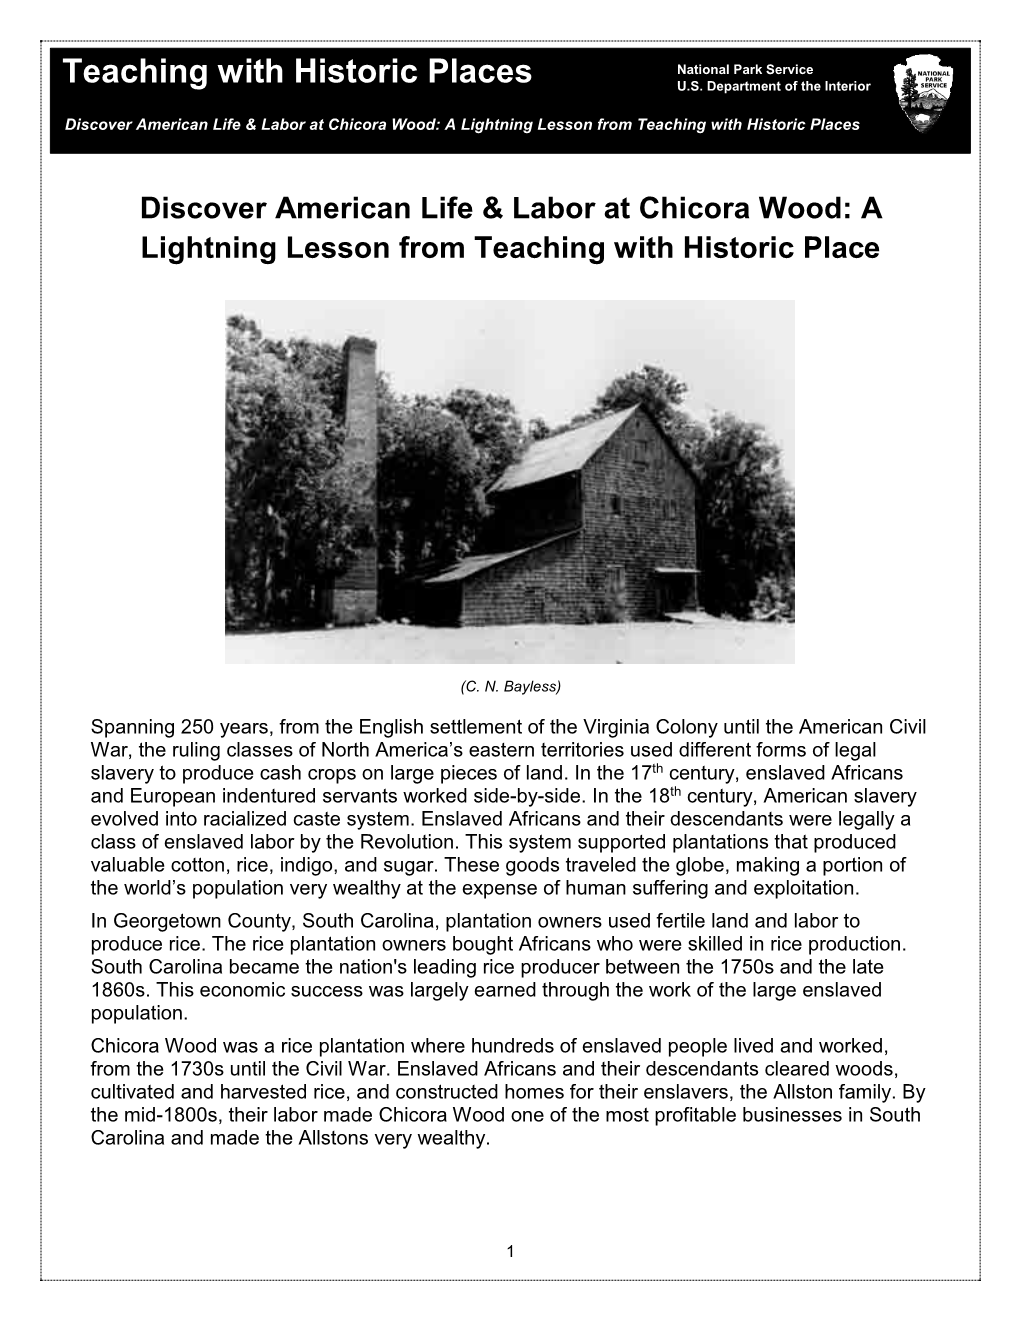 Discover American Life & Labor at Chicora Wood